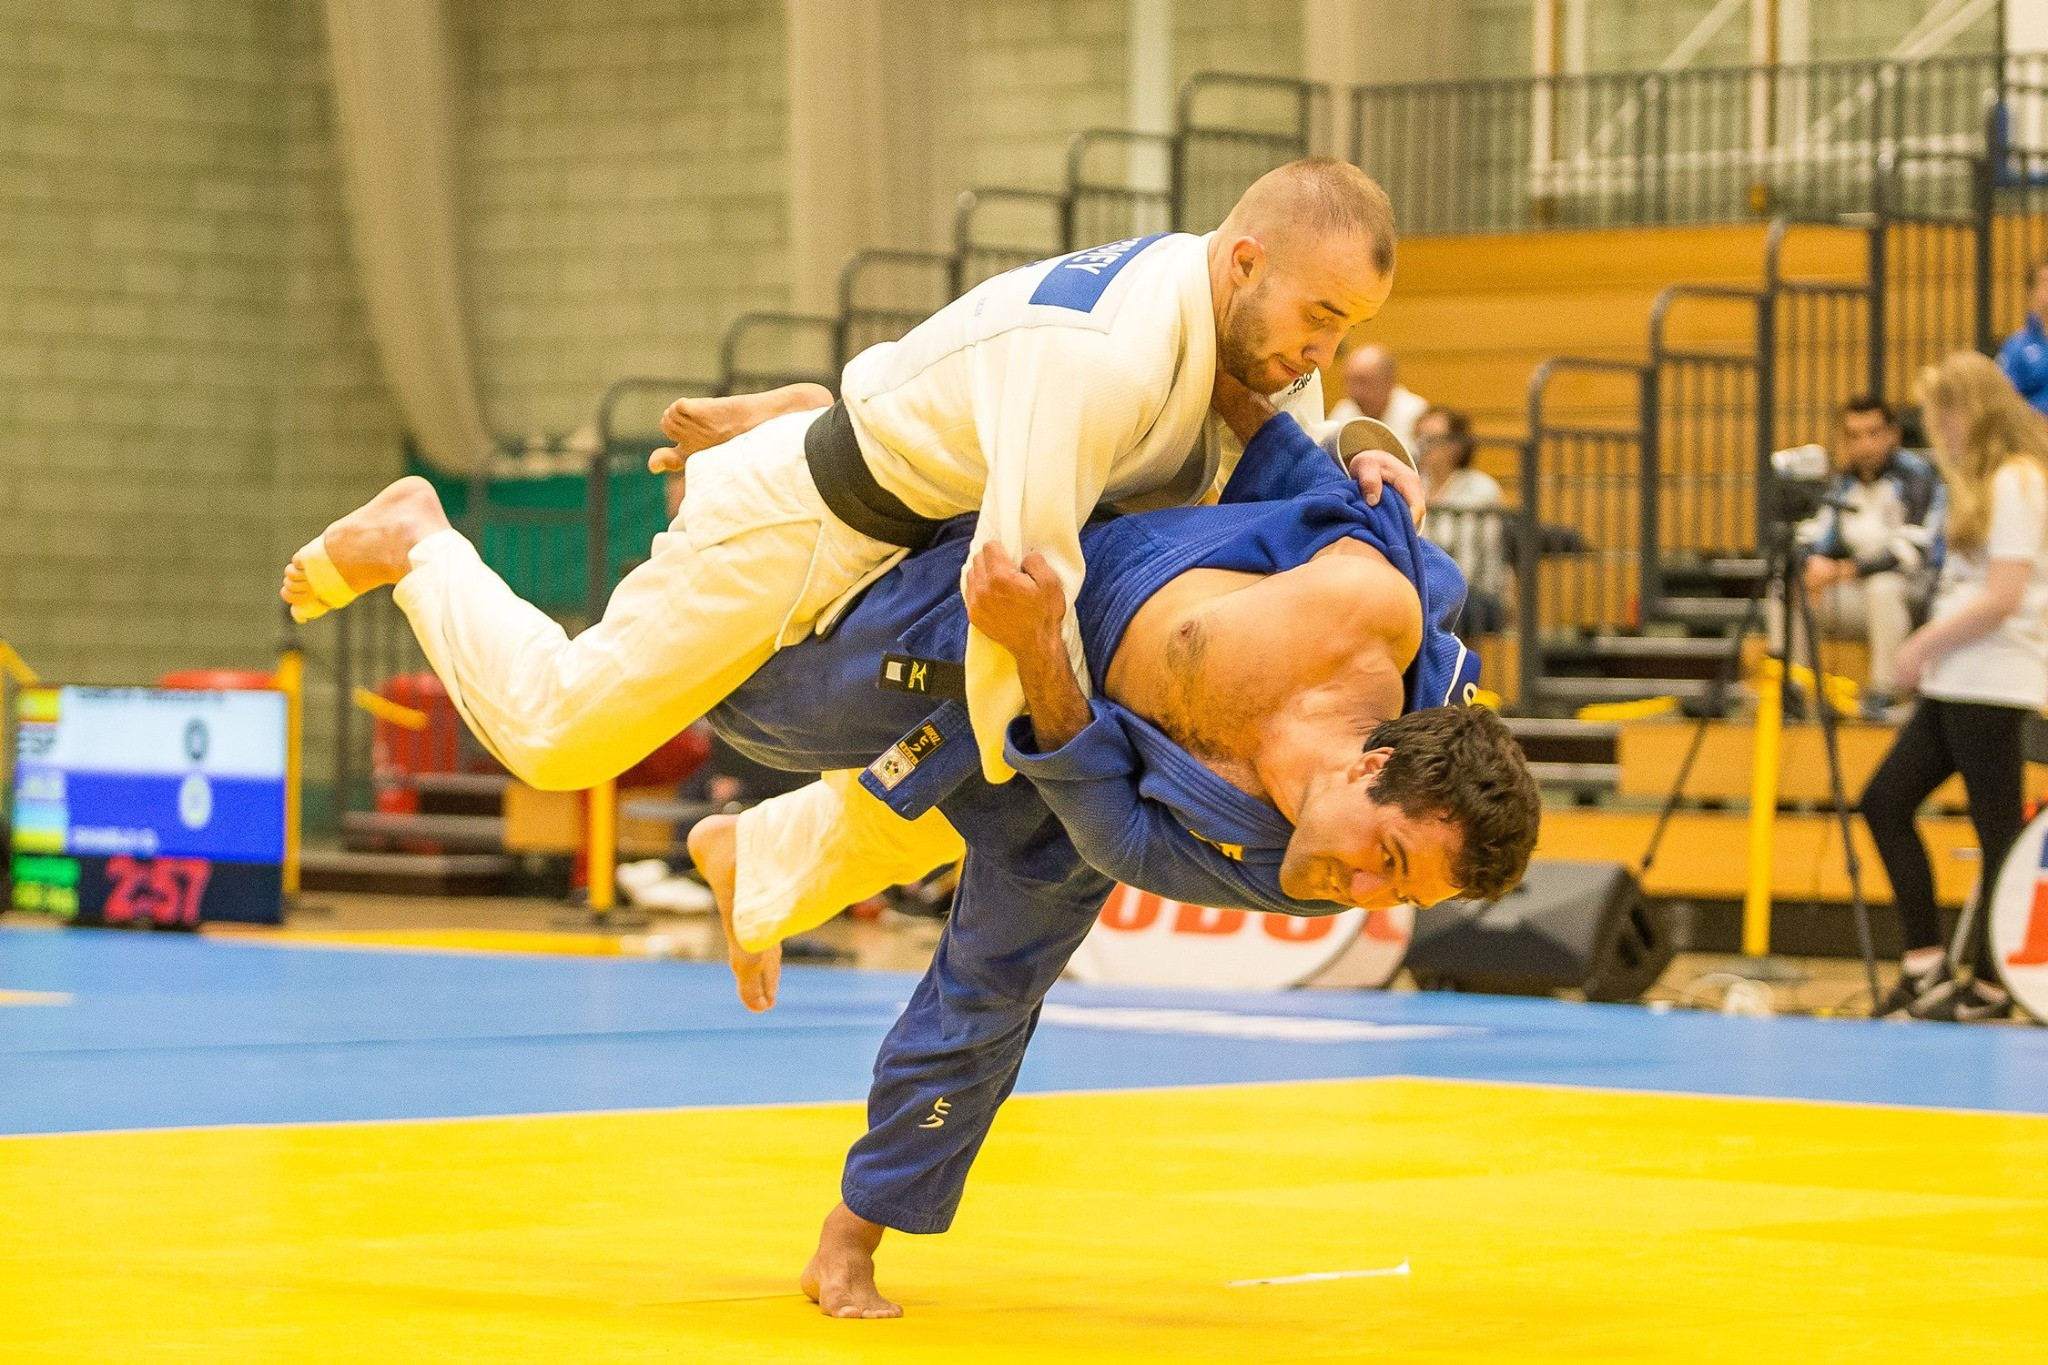 Today was the first of three days of competition ©British Judo Association/Facebook